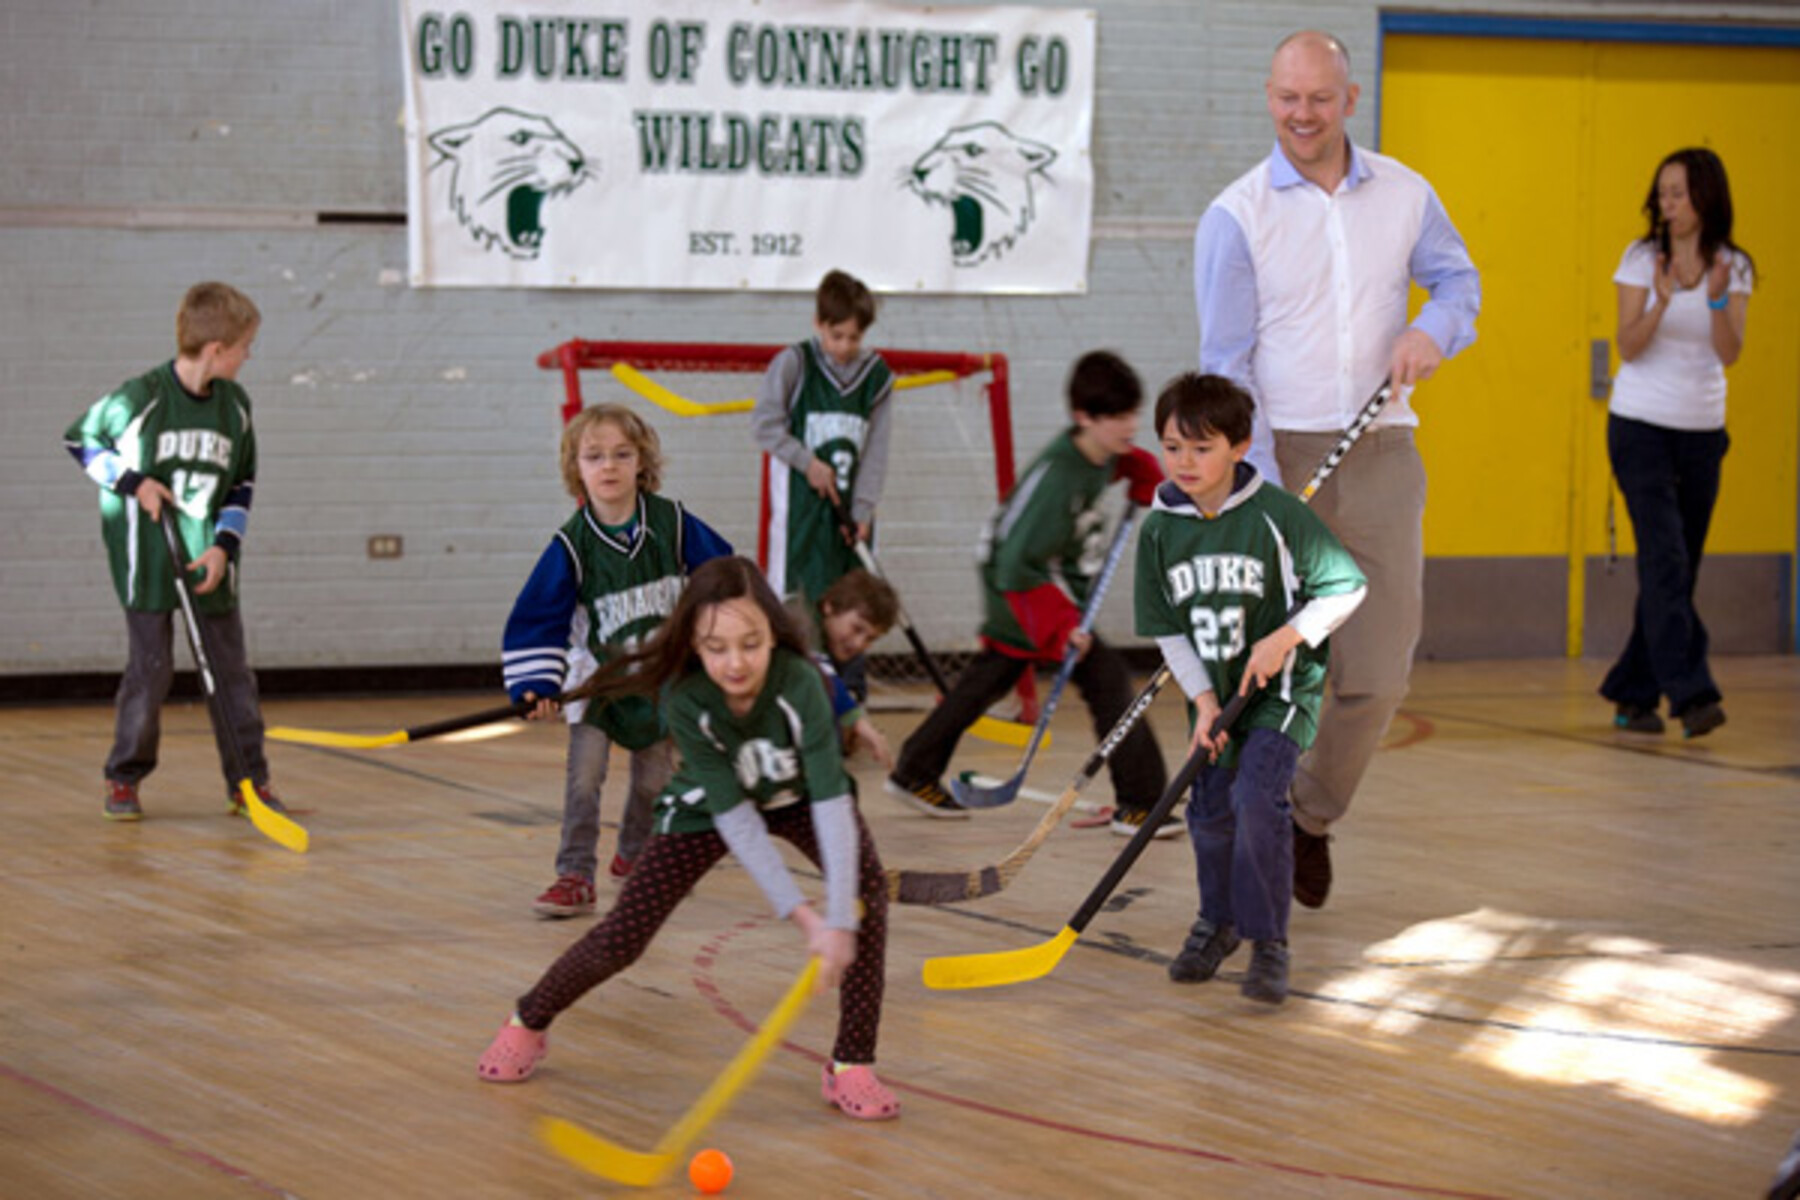 Hockey Hall of Fame star Mats Sundin is partnering with U of T to fight childhood obesity (photos by Jon Horvatin)